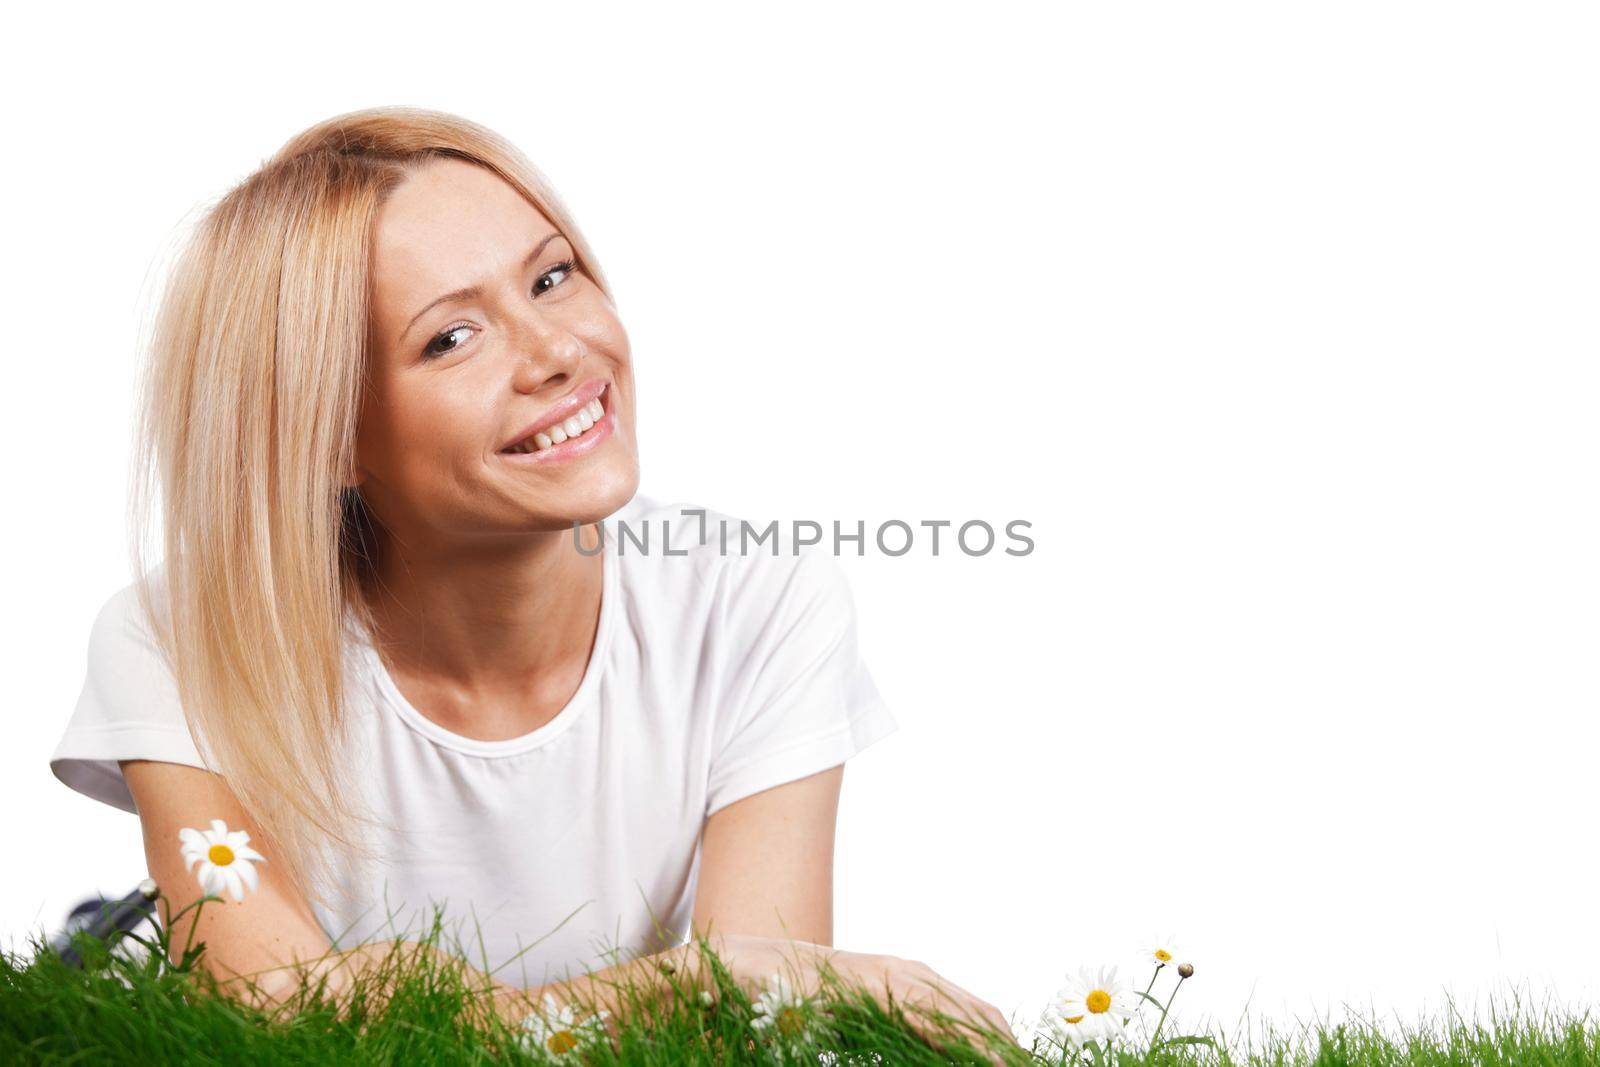 Woman on grass with flowers by Yellowj